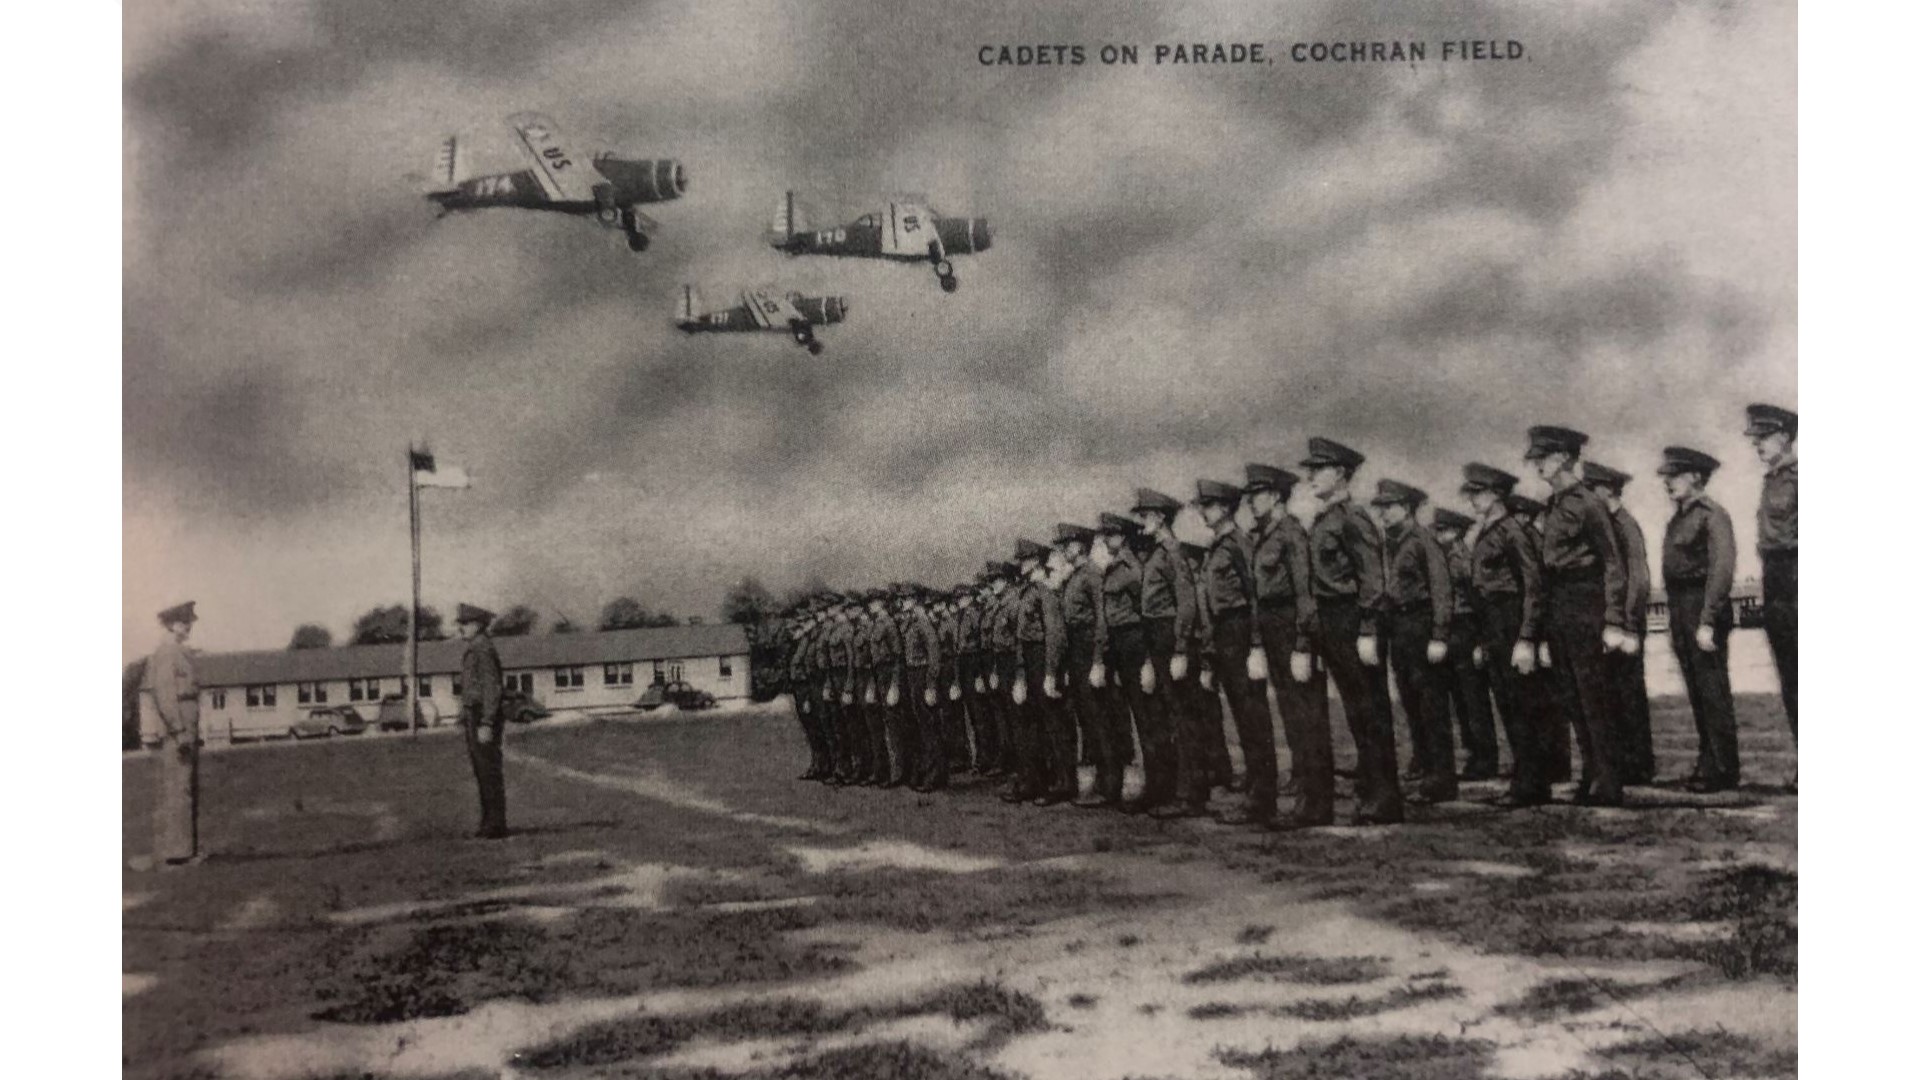 Cochran Field was not only known as an air field used to train cadets in WWII, but as a community of people who lived around the area.